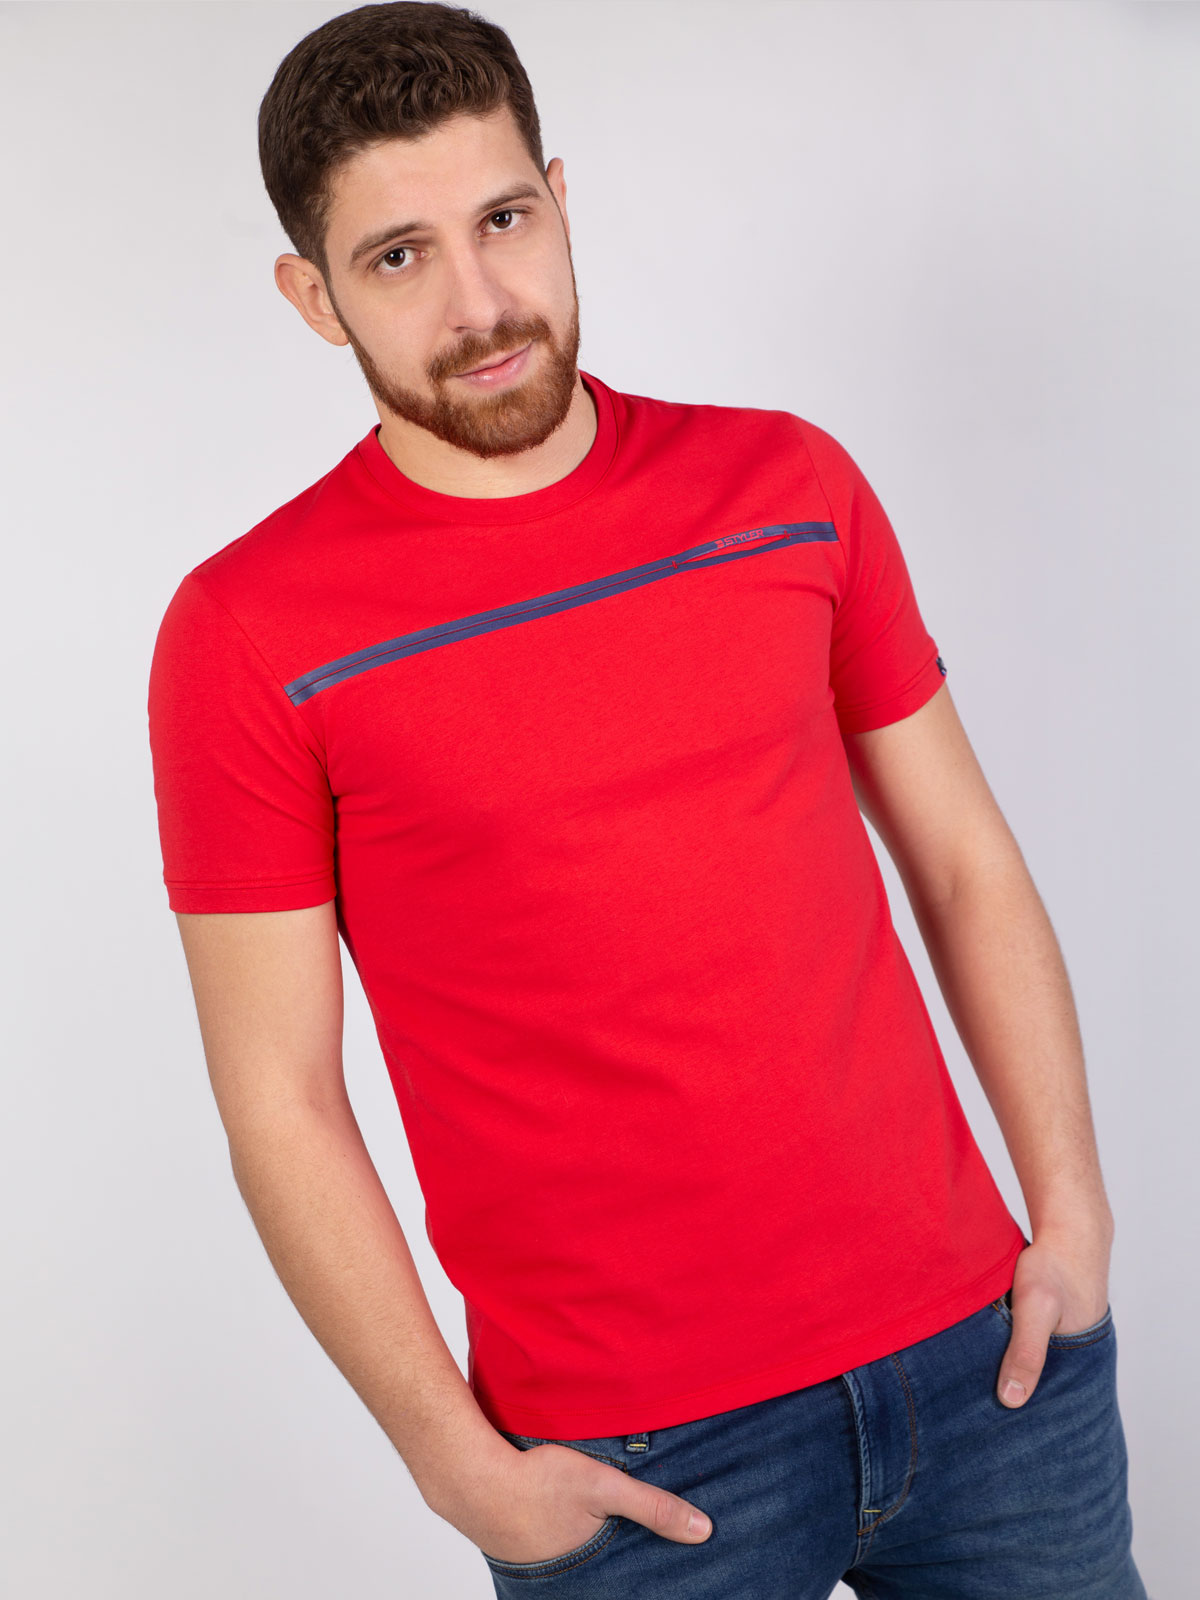 Red tshirt with blue print - 96389 € 12.37 img3